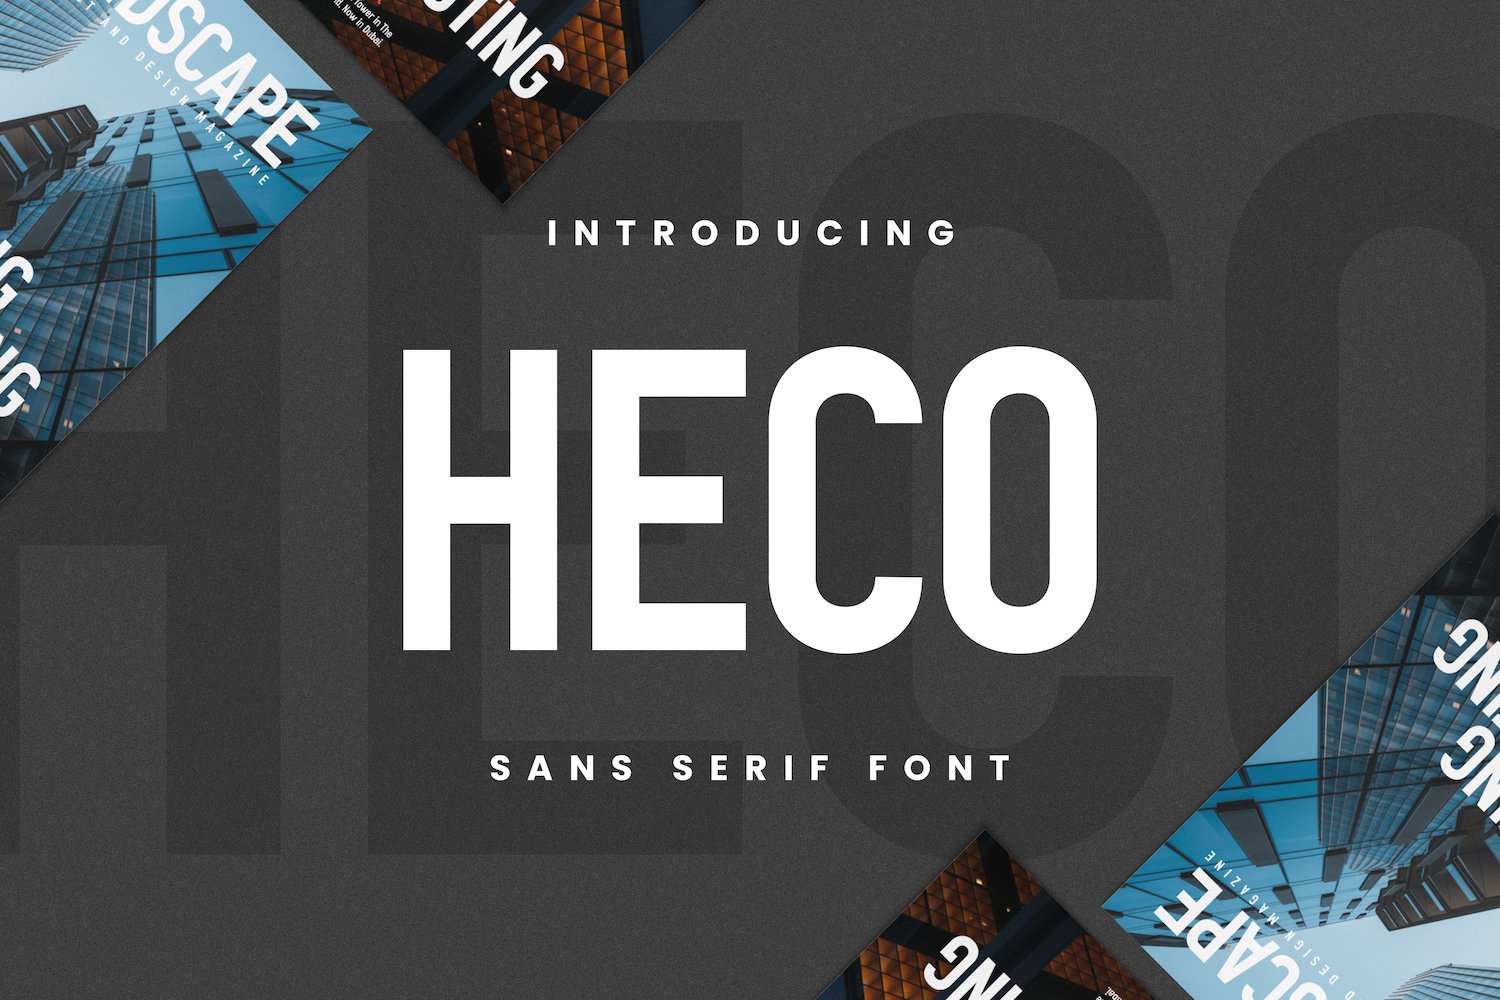 Heco - Condensed Sans Serif Fonts cover image.